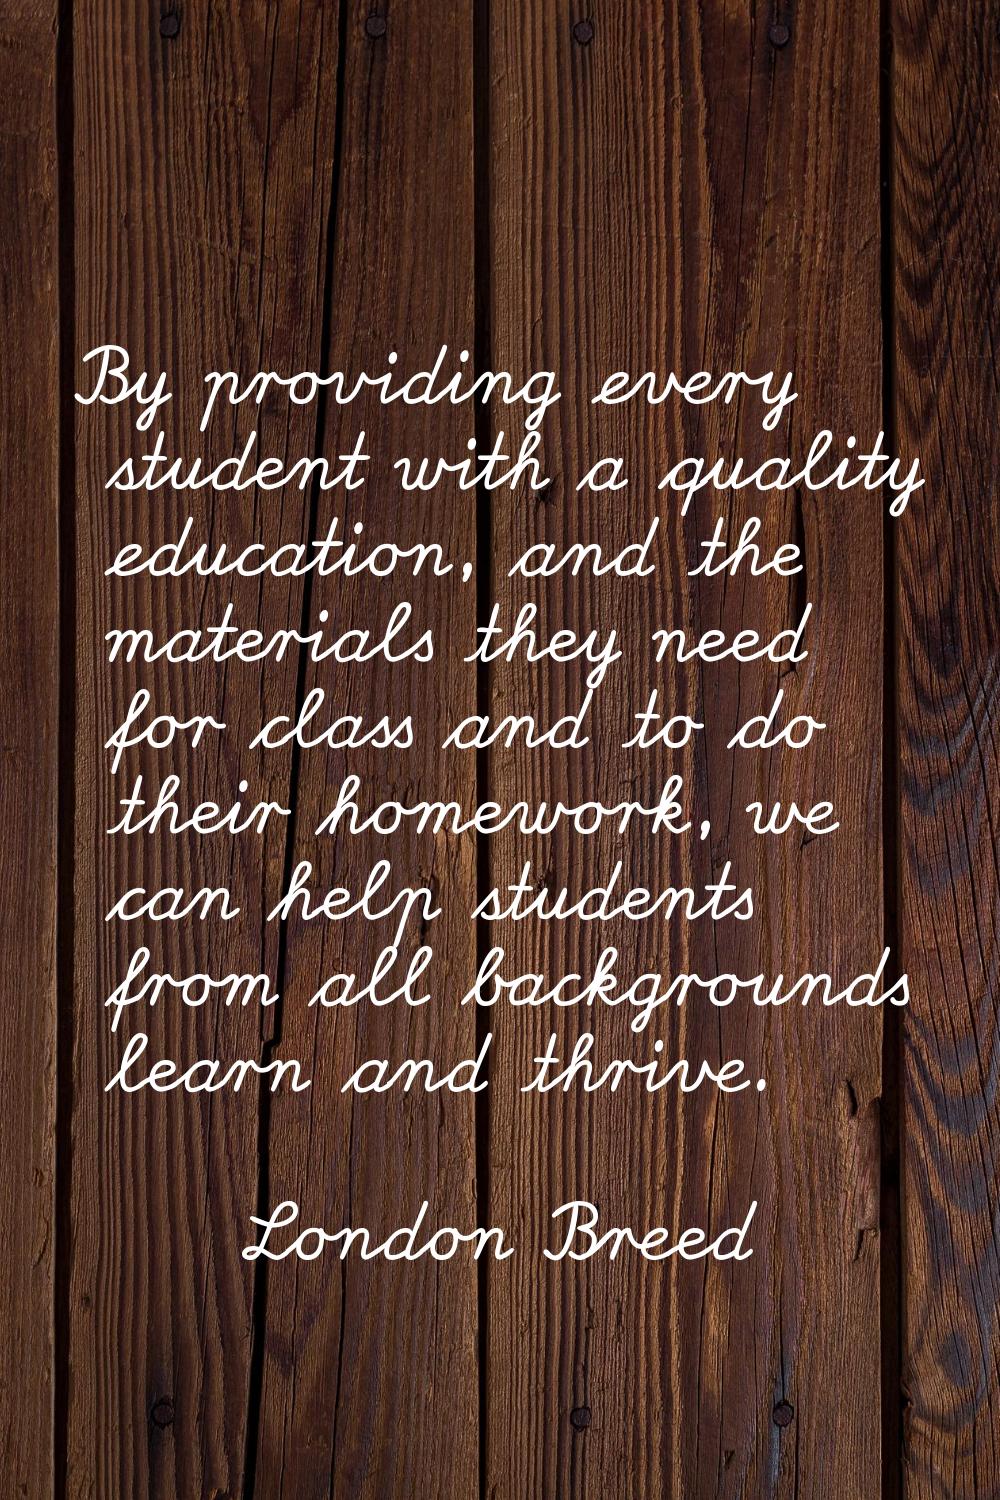 By providing every student with a quality education, and the materials they need for class and to d